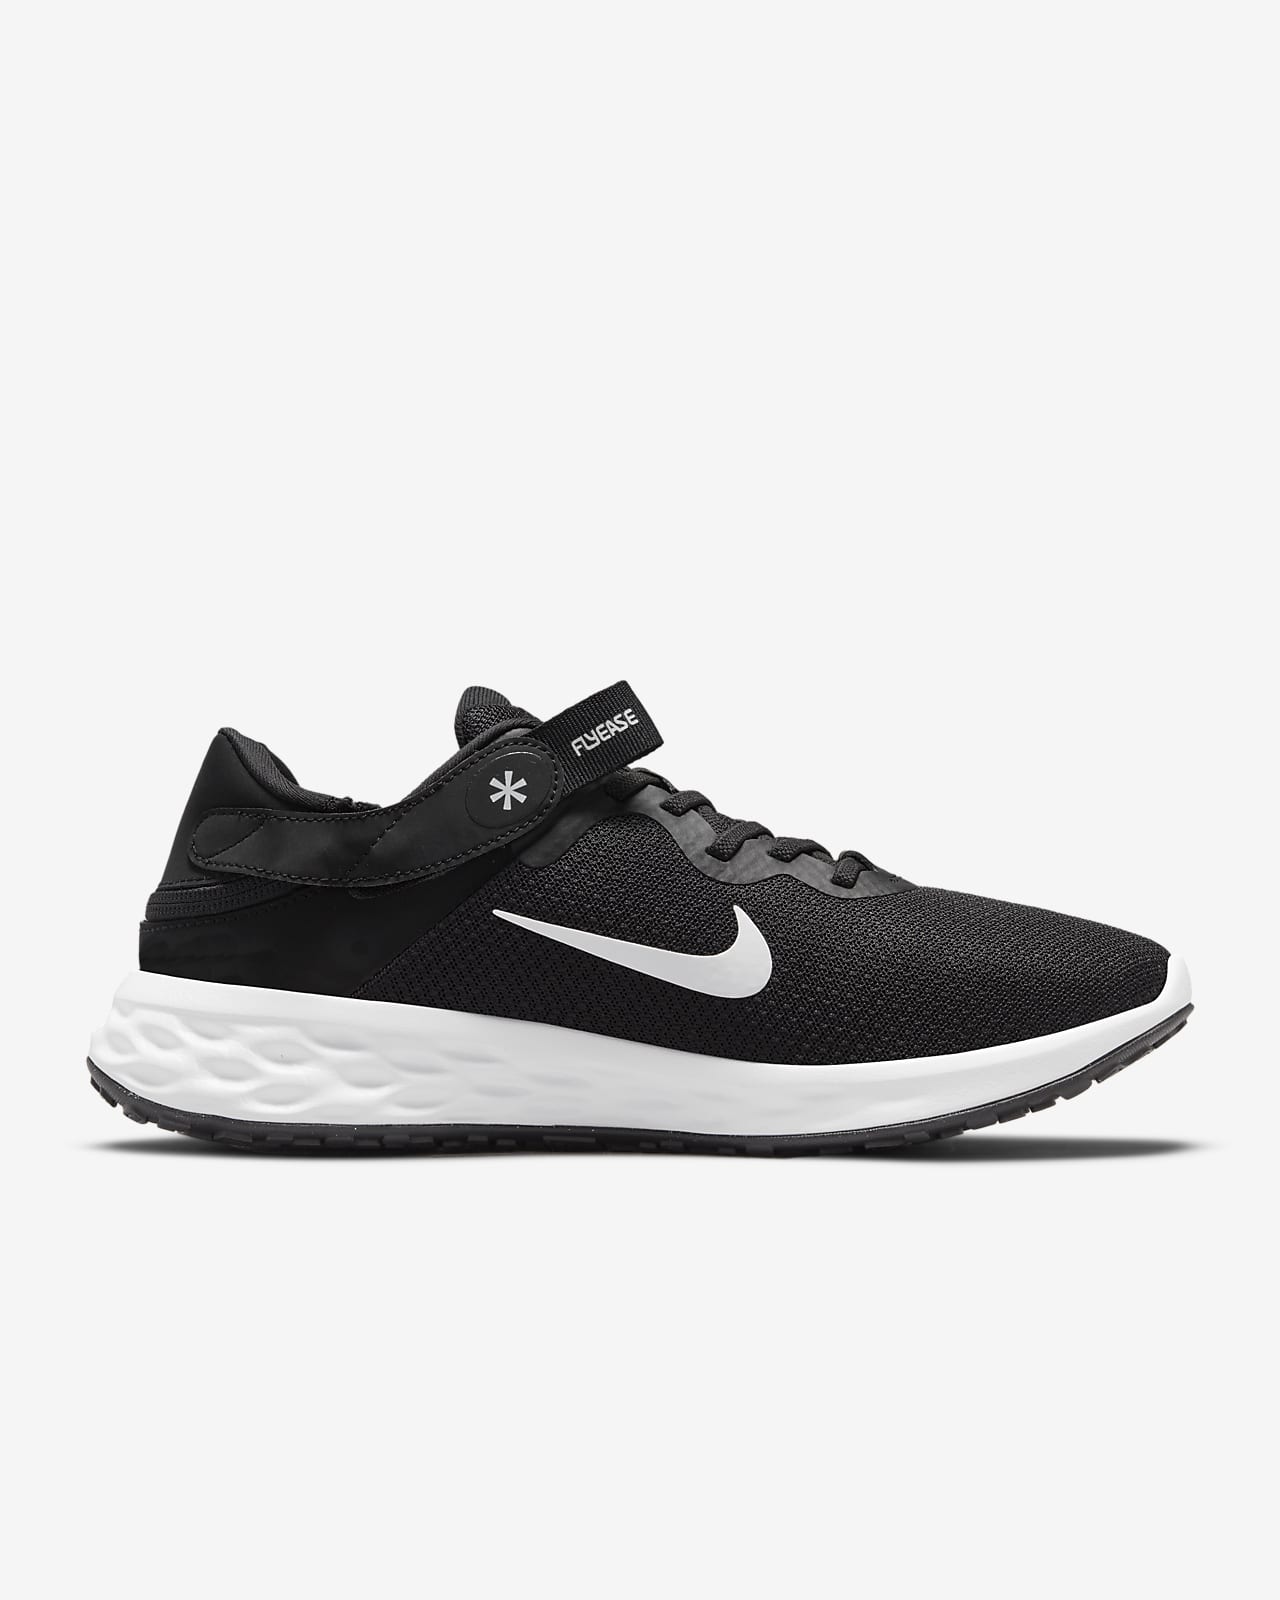 Nike 6 Men's Easy On/Off Road Running Shoes.